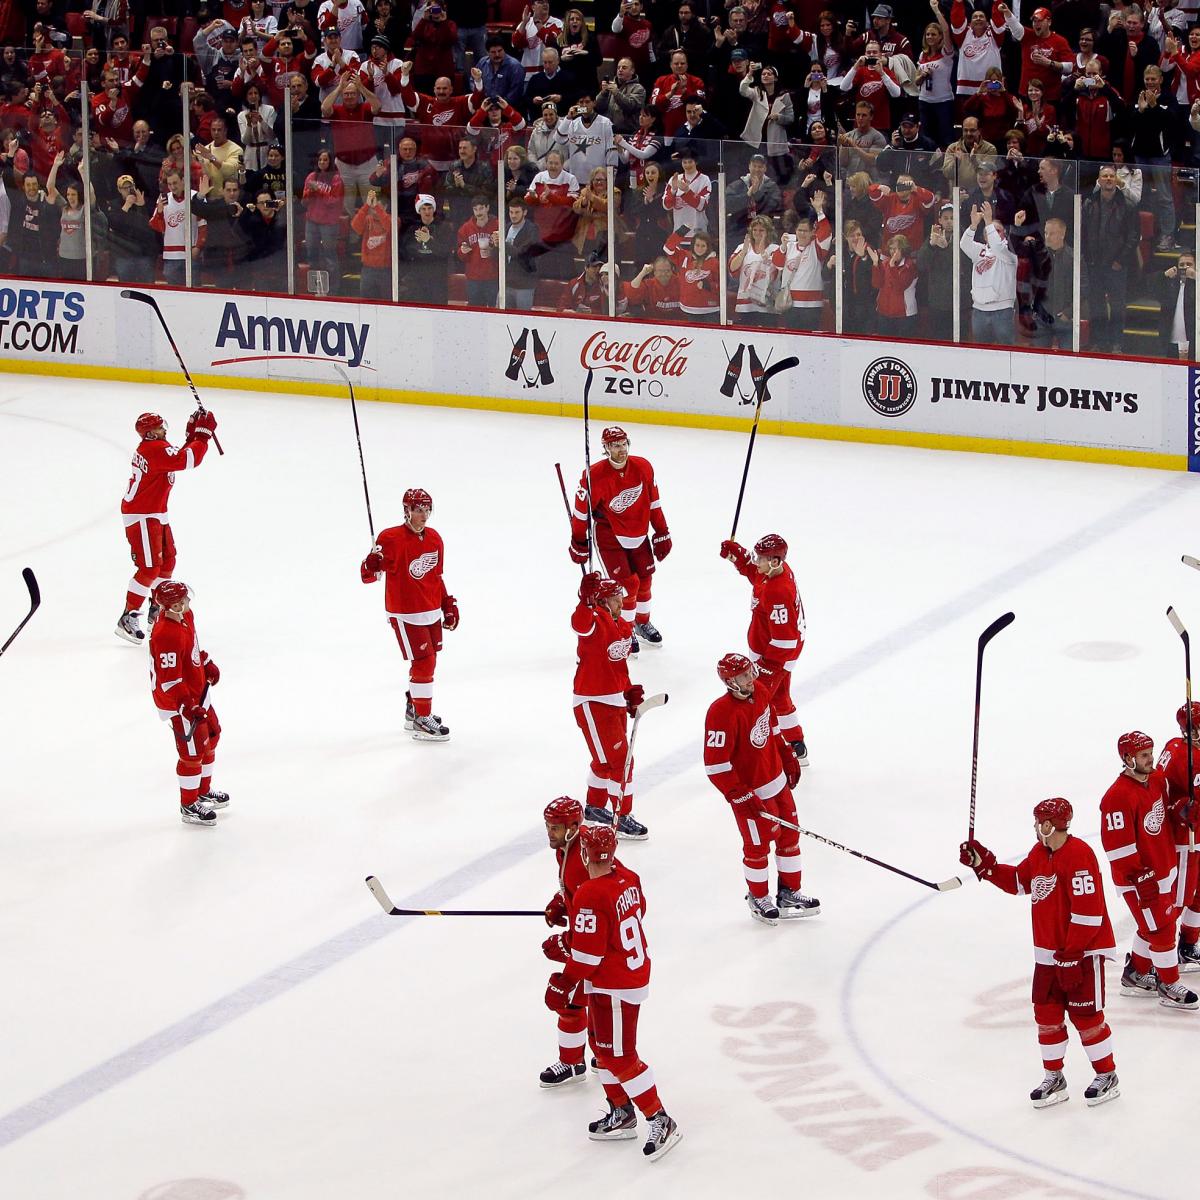 Detroit Red Wings' Home Winning Streak Ends; How Does It Rate? News